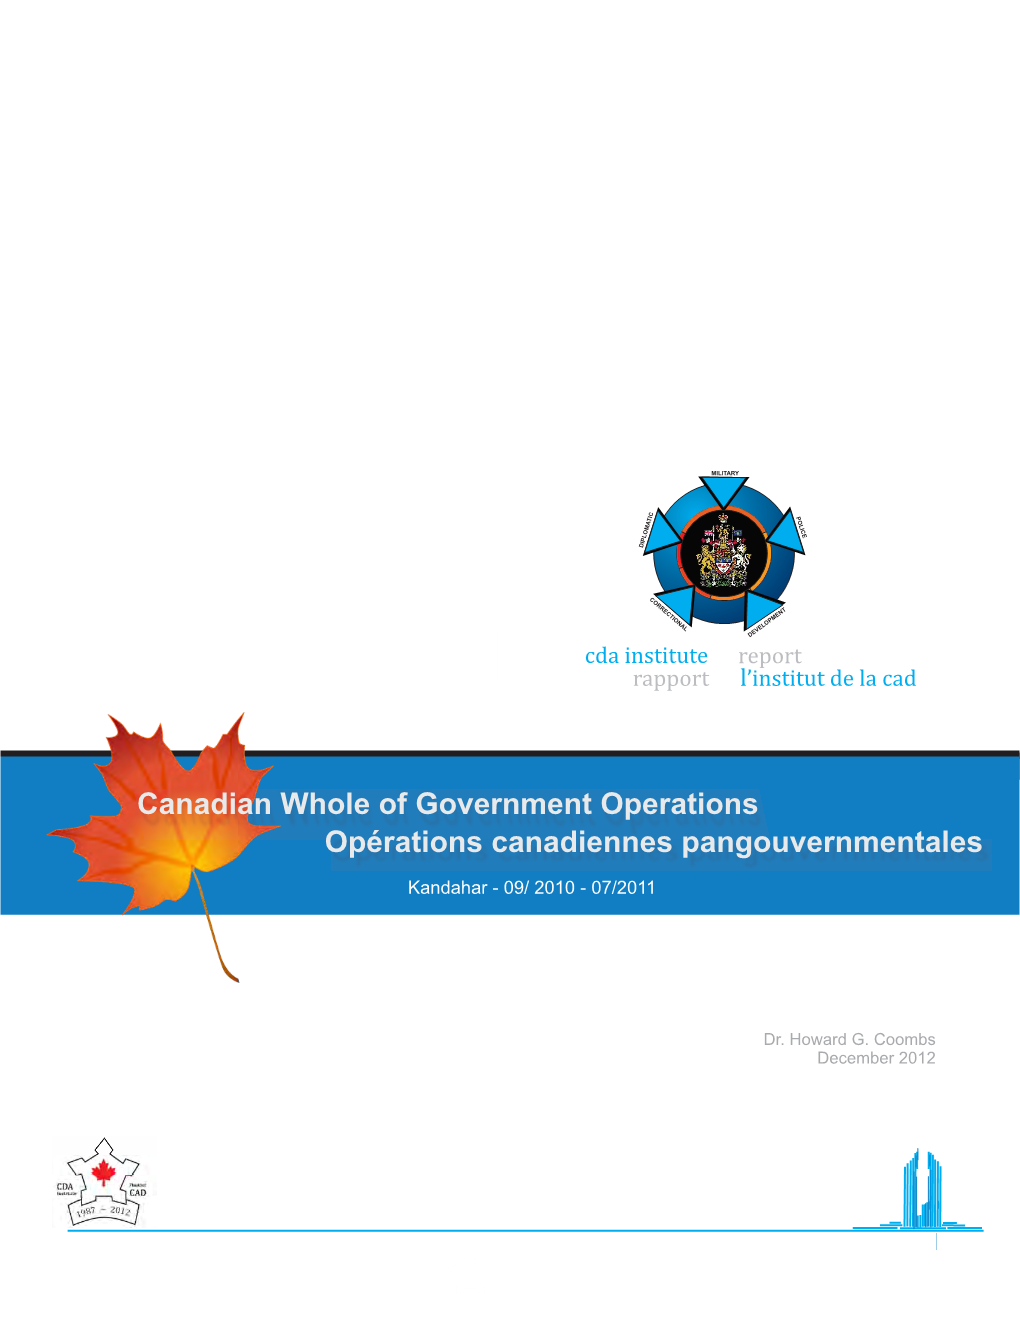 Canadian Whole of Government Operations Opérations Canadiennes Pangouvernmentales